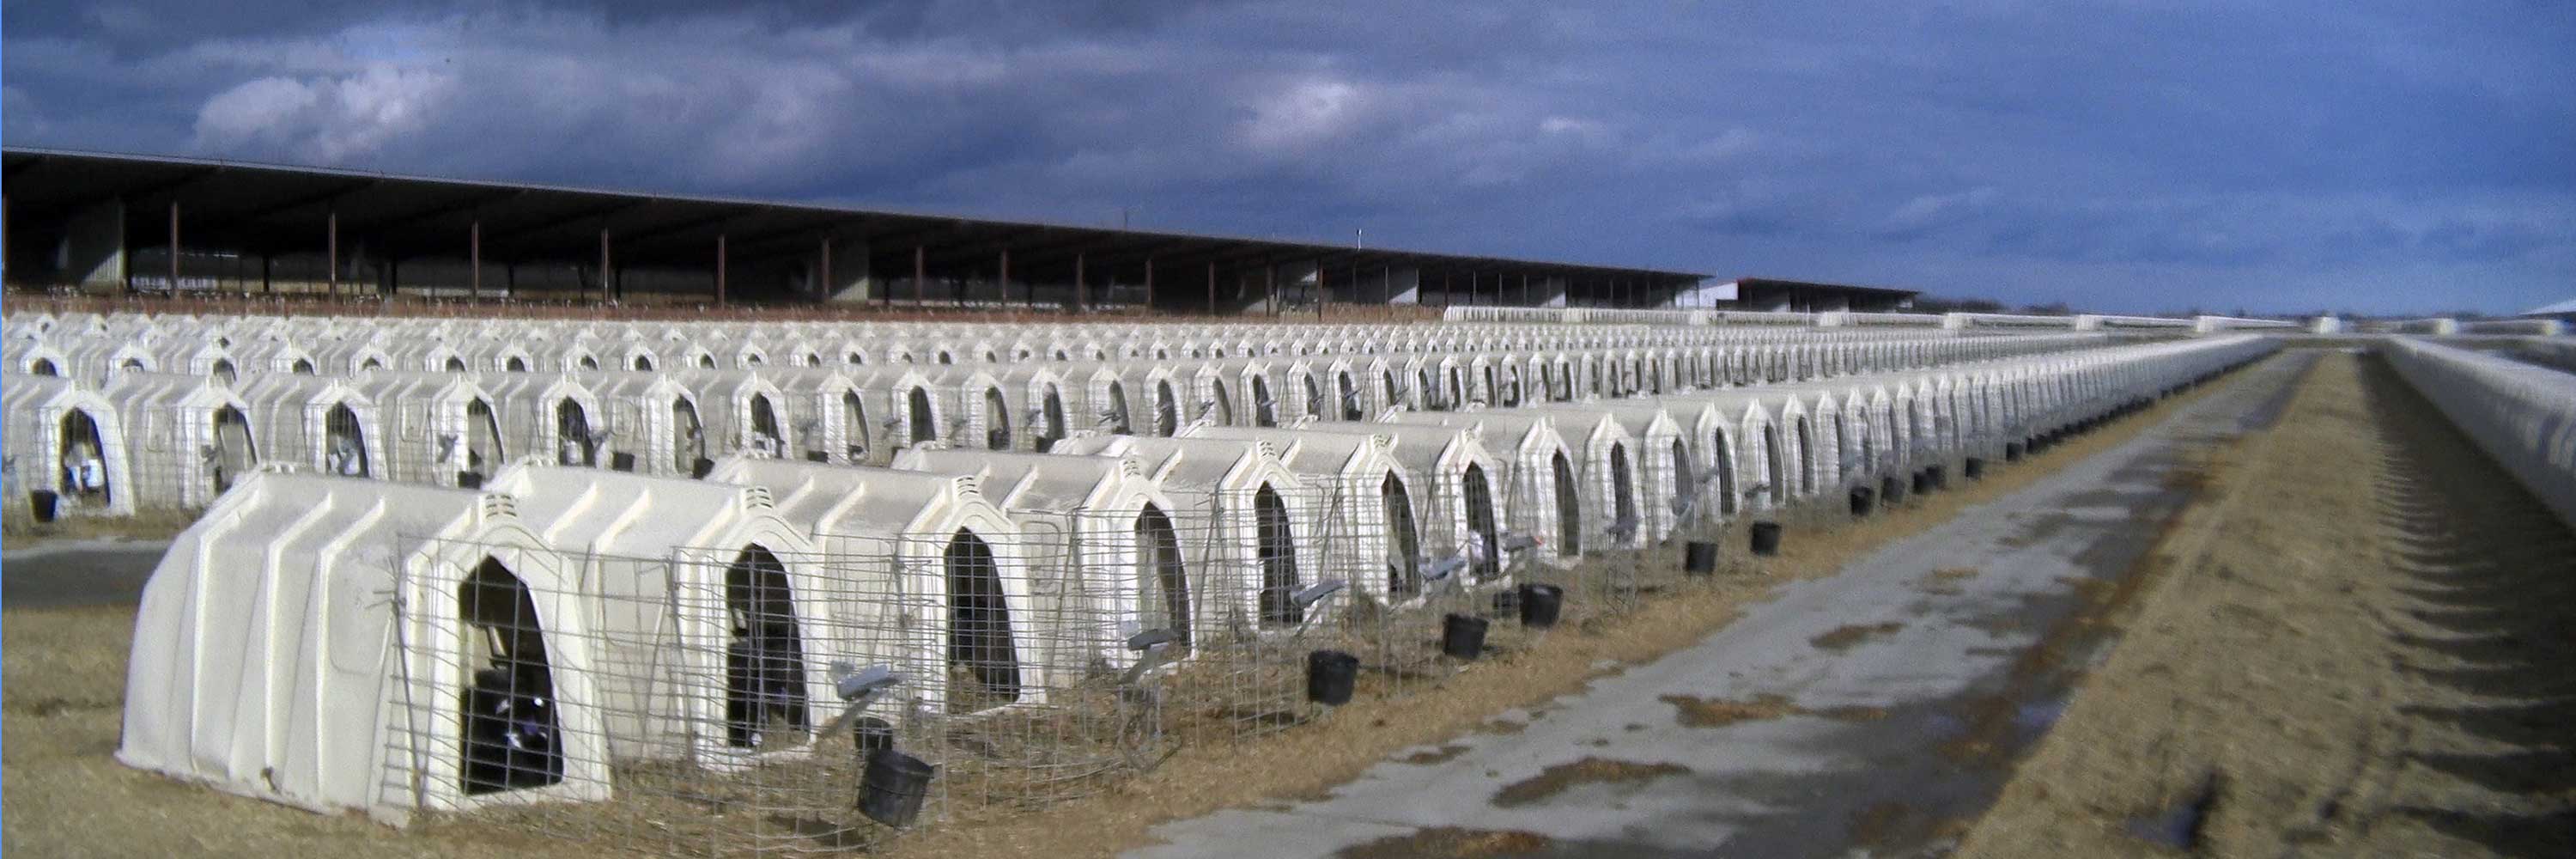 View of the plastic huts that calves live in on dairy farms